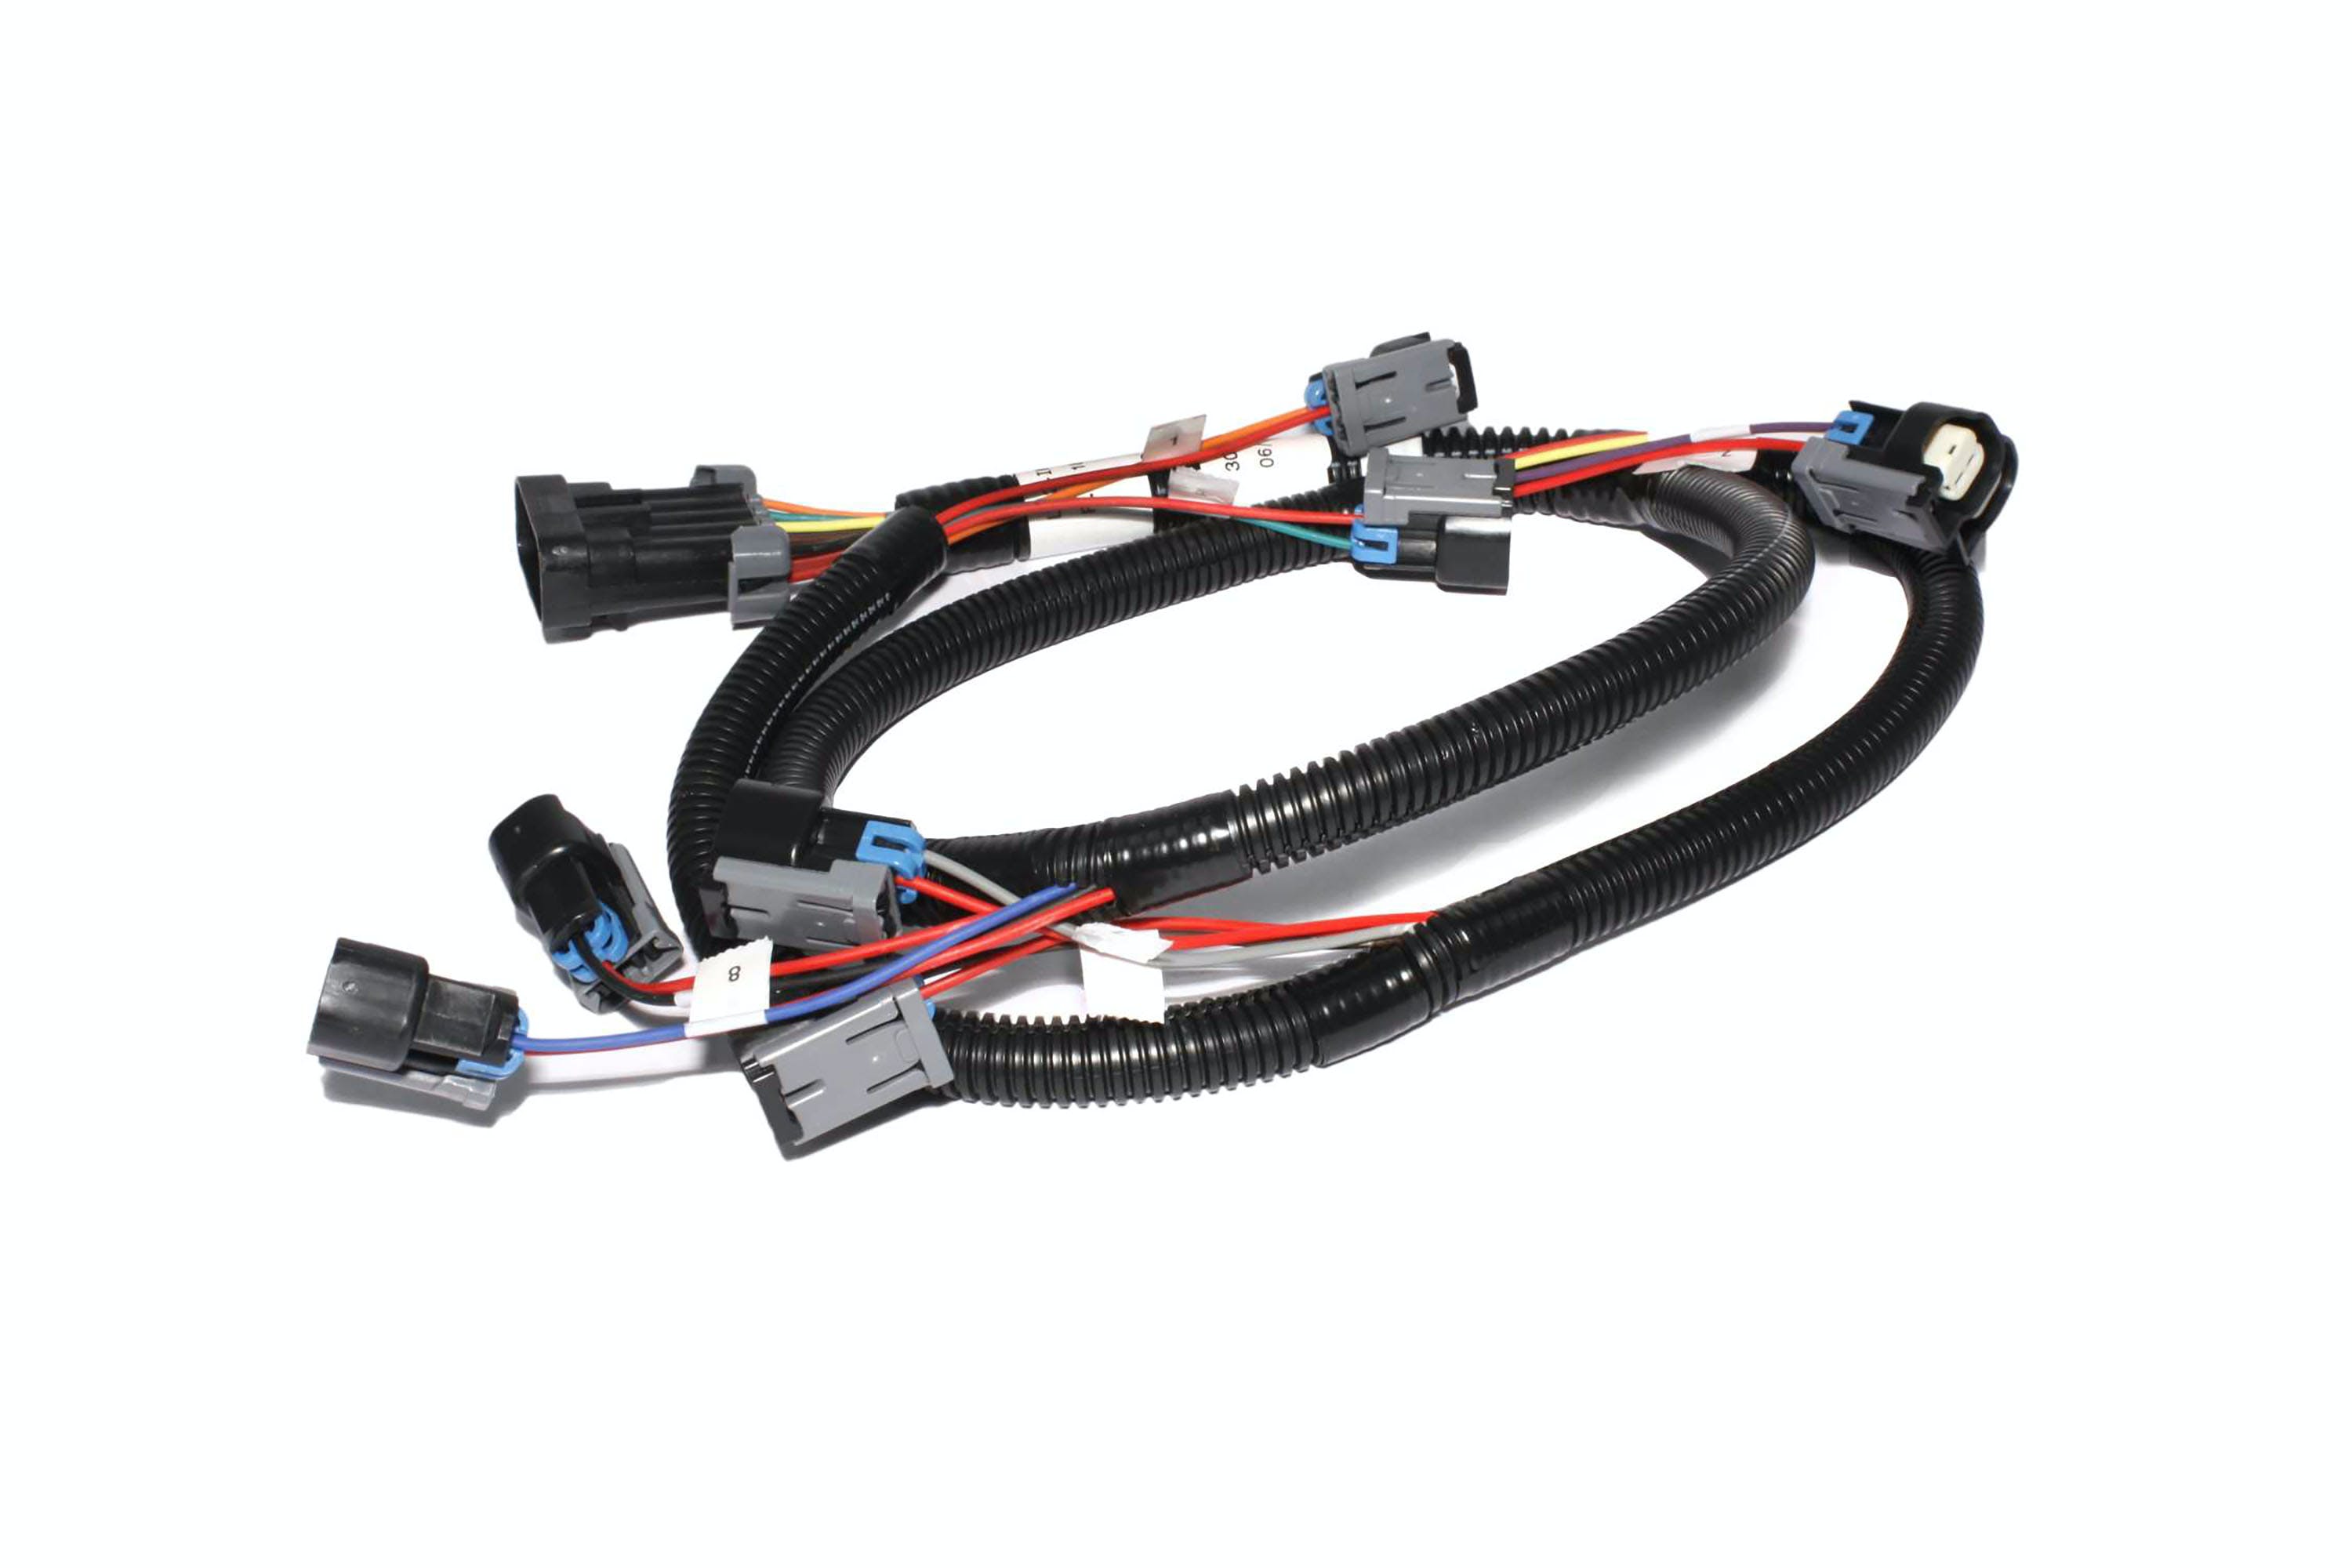 FAST - Fuel Air Spark Technology 301209 XFI Fuel Inector Harness for GM LS Series engines.